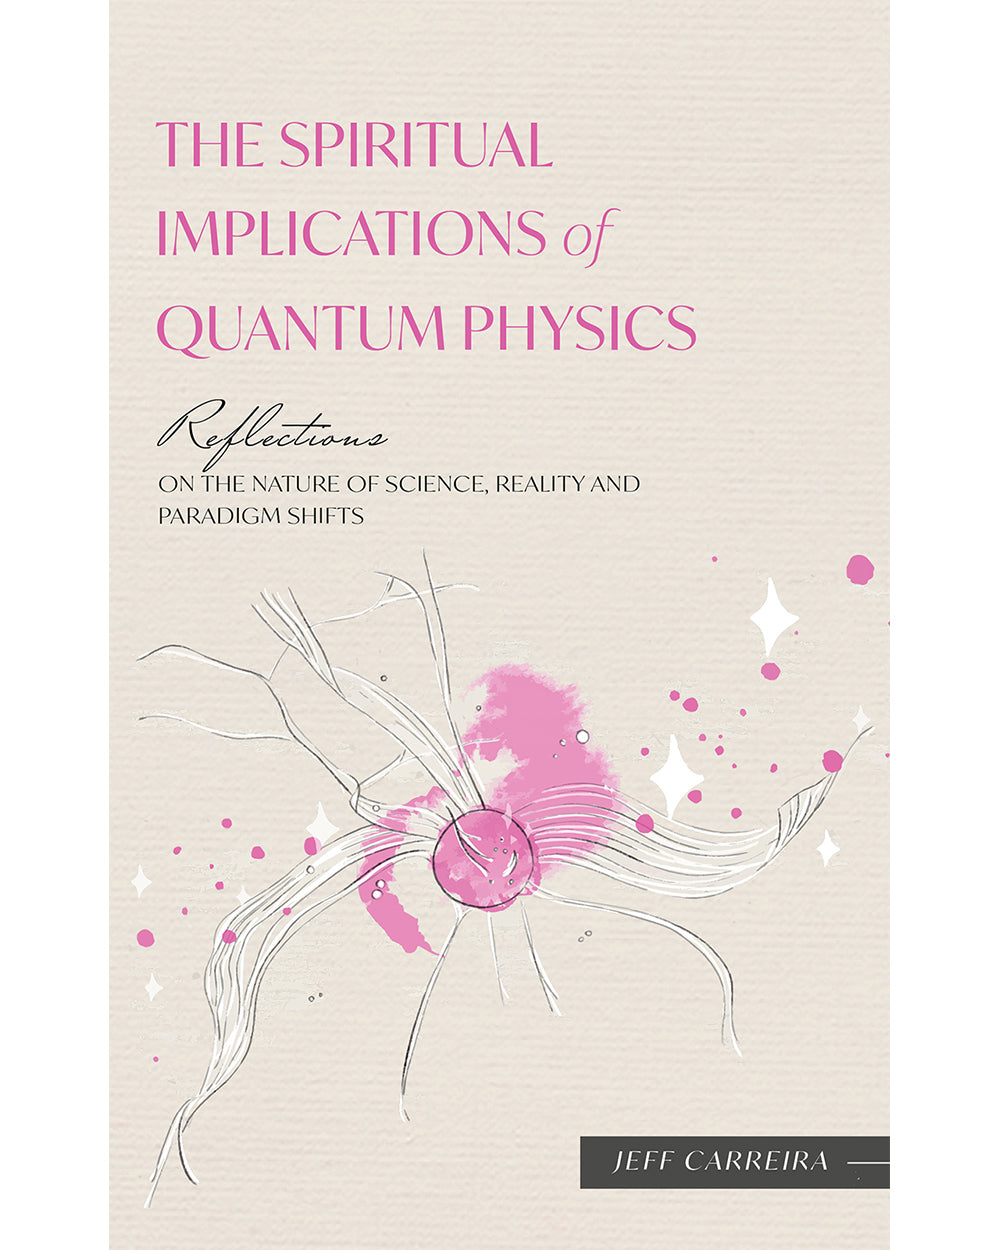 The Spiritual Implications of Quantum Physics: Reflections on the Nature of Science, Reality and Paradigm Shifts